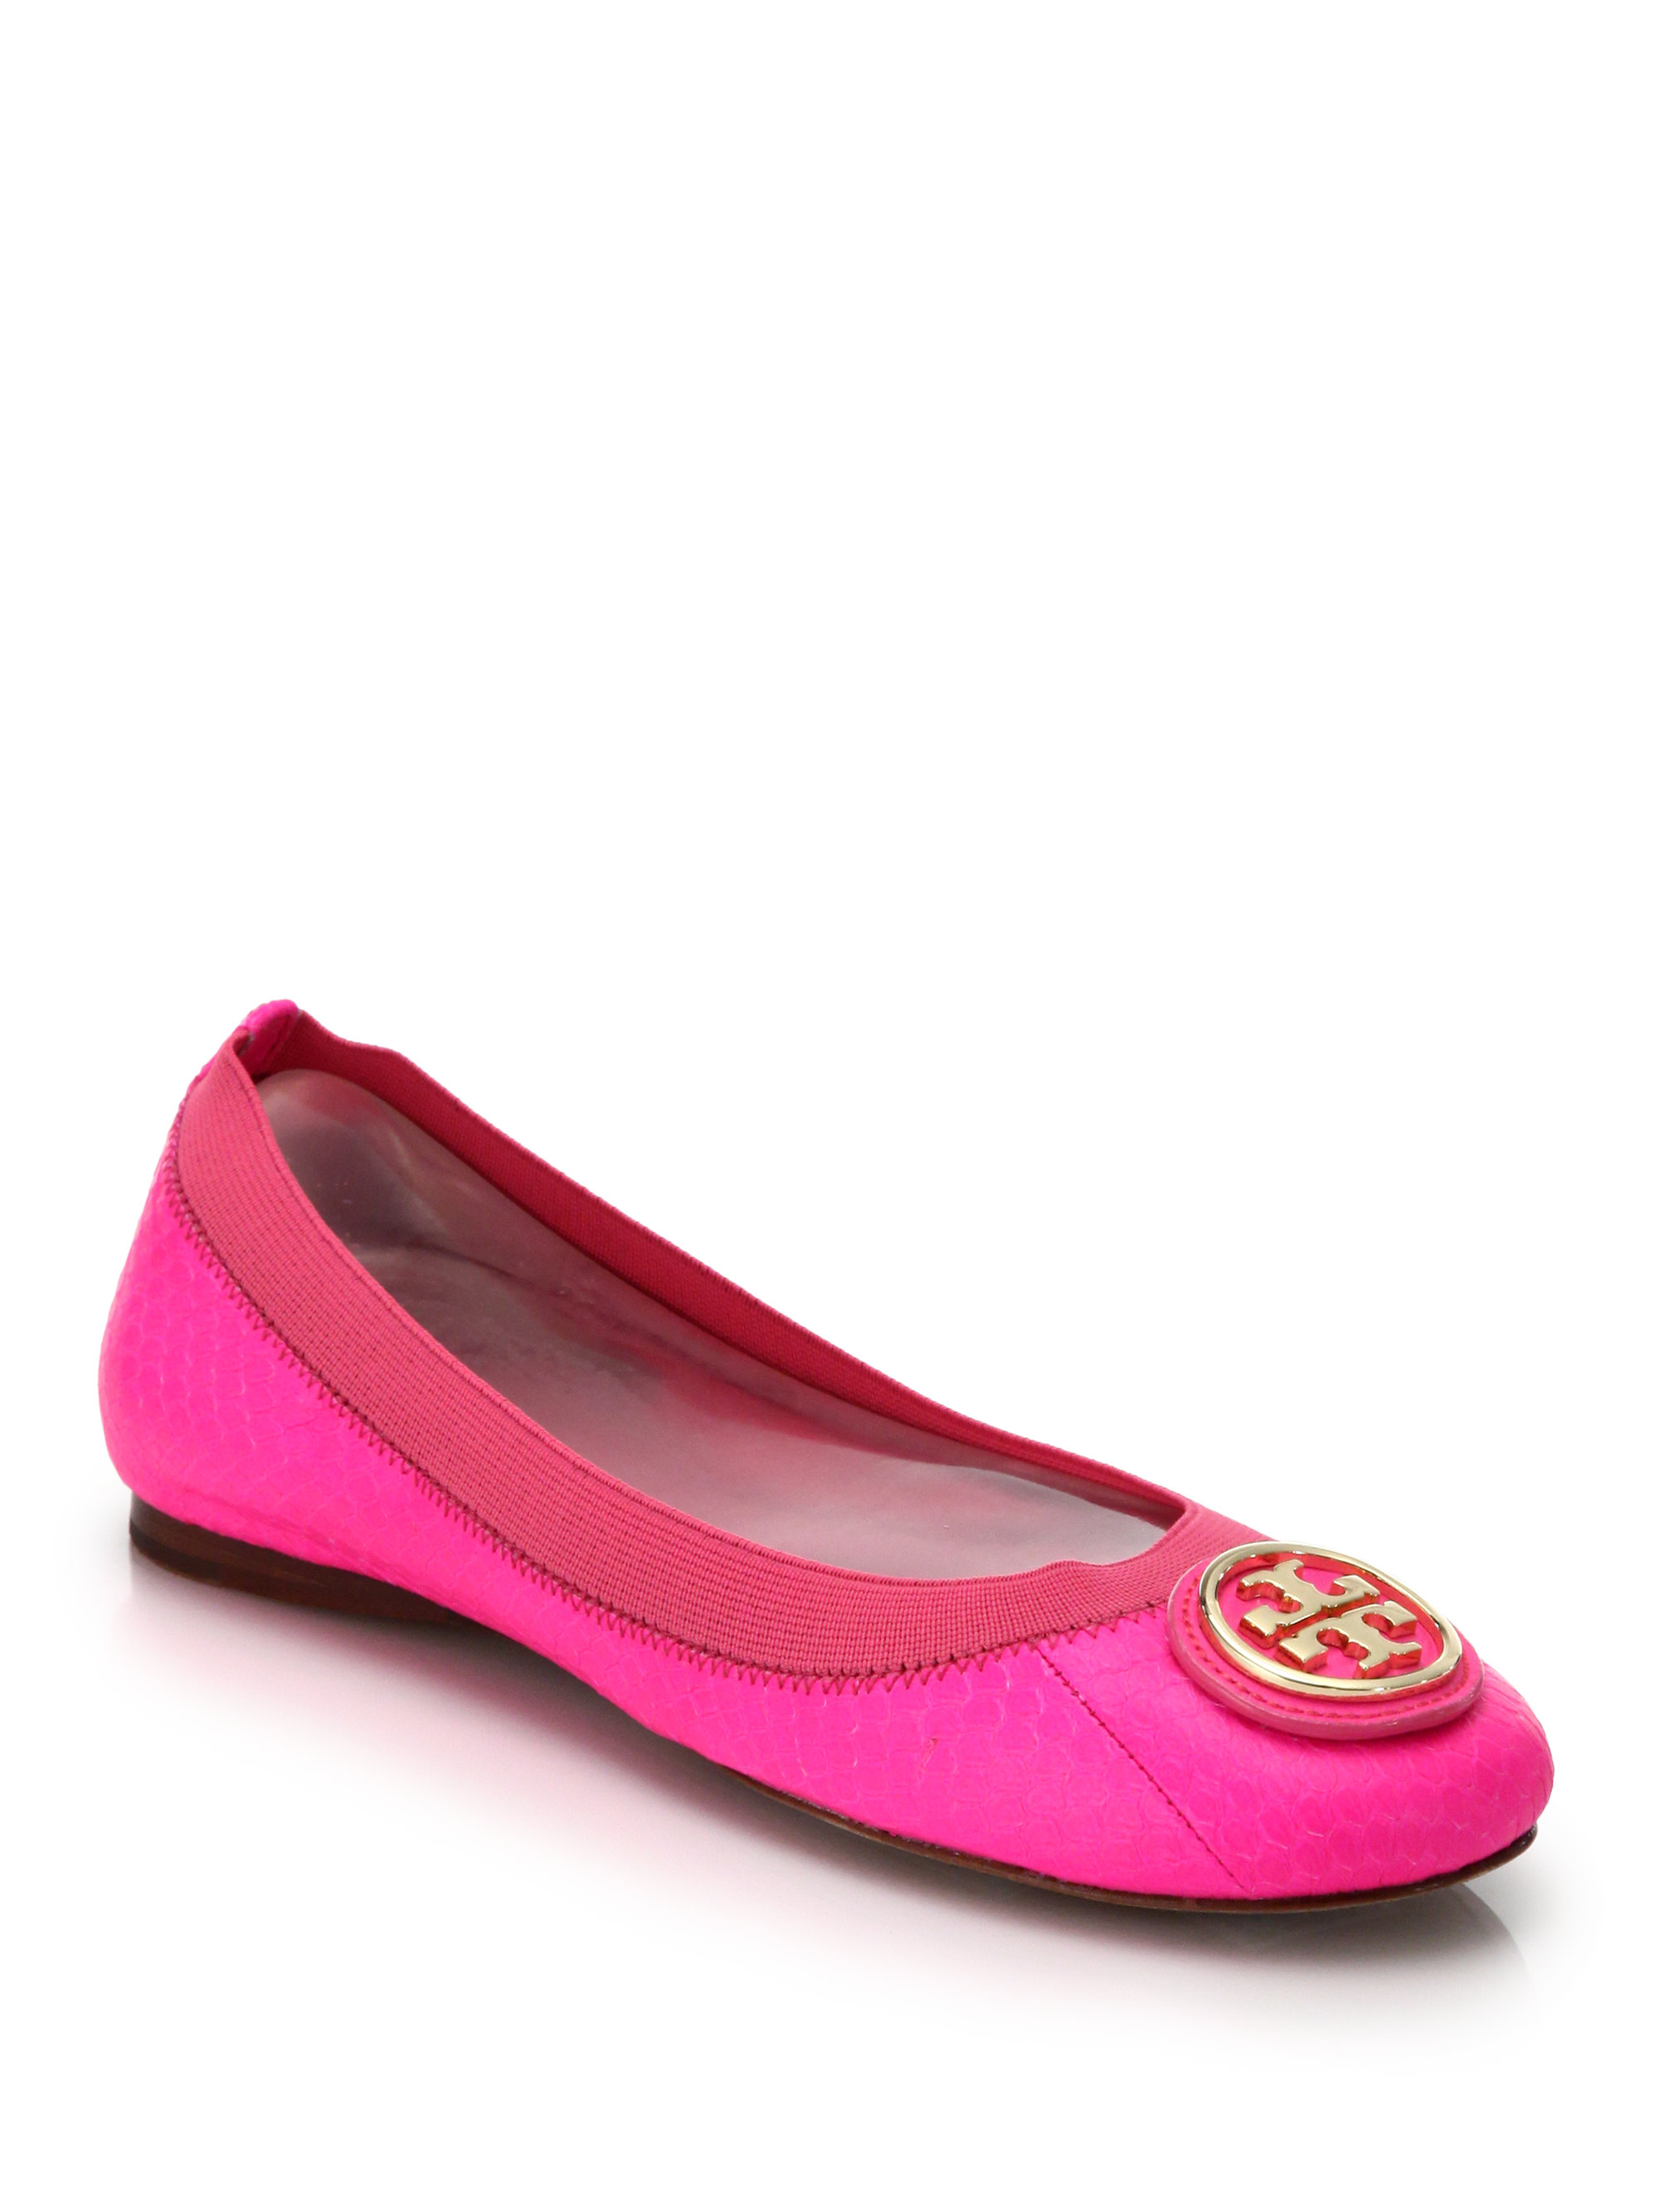 Tory burch Caroline Snake-embossed Leather Logo Flats in Pink | Lyst